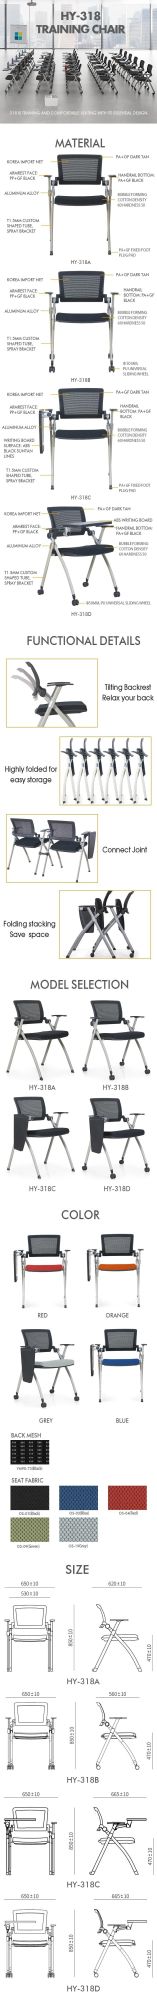 Folding Training Chair Office Meeting Room School Chair with Tablet